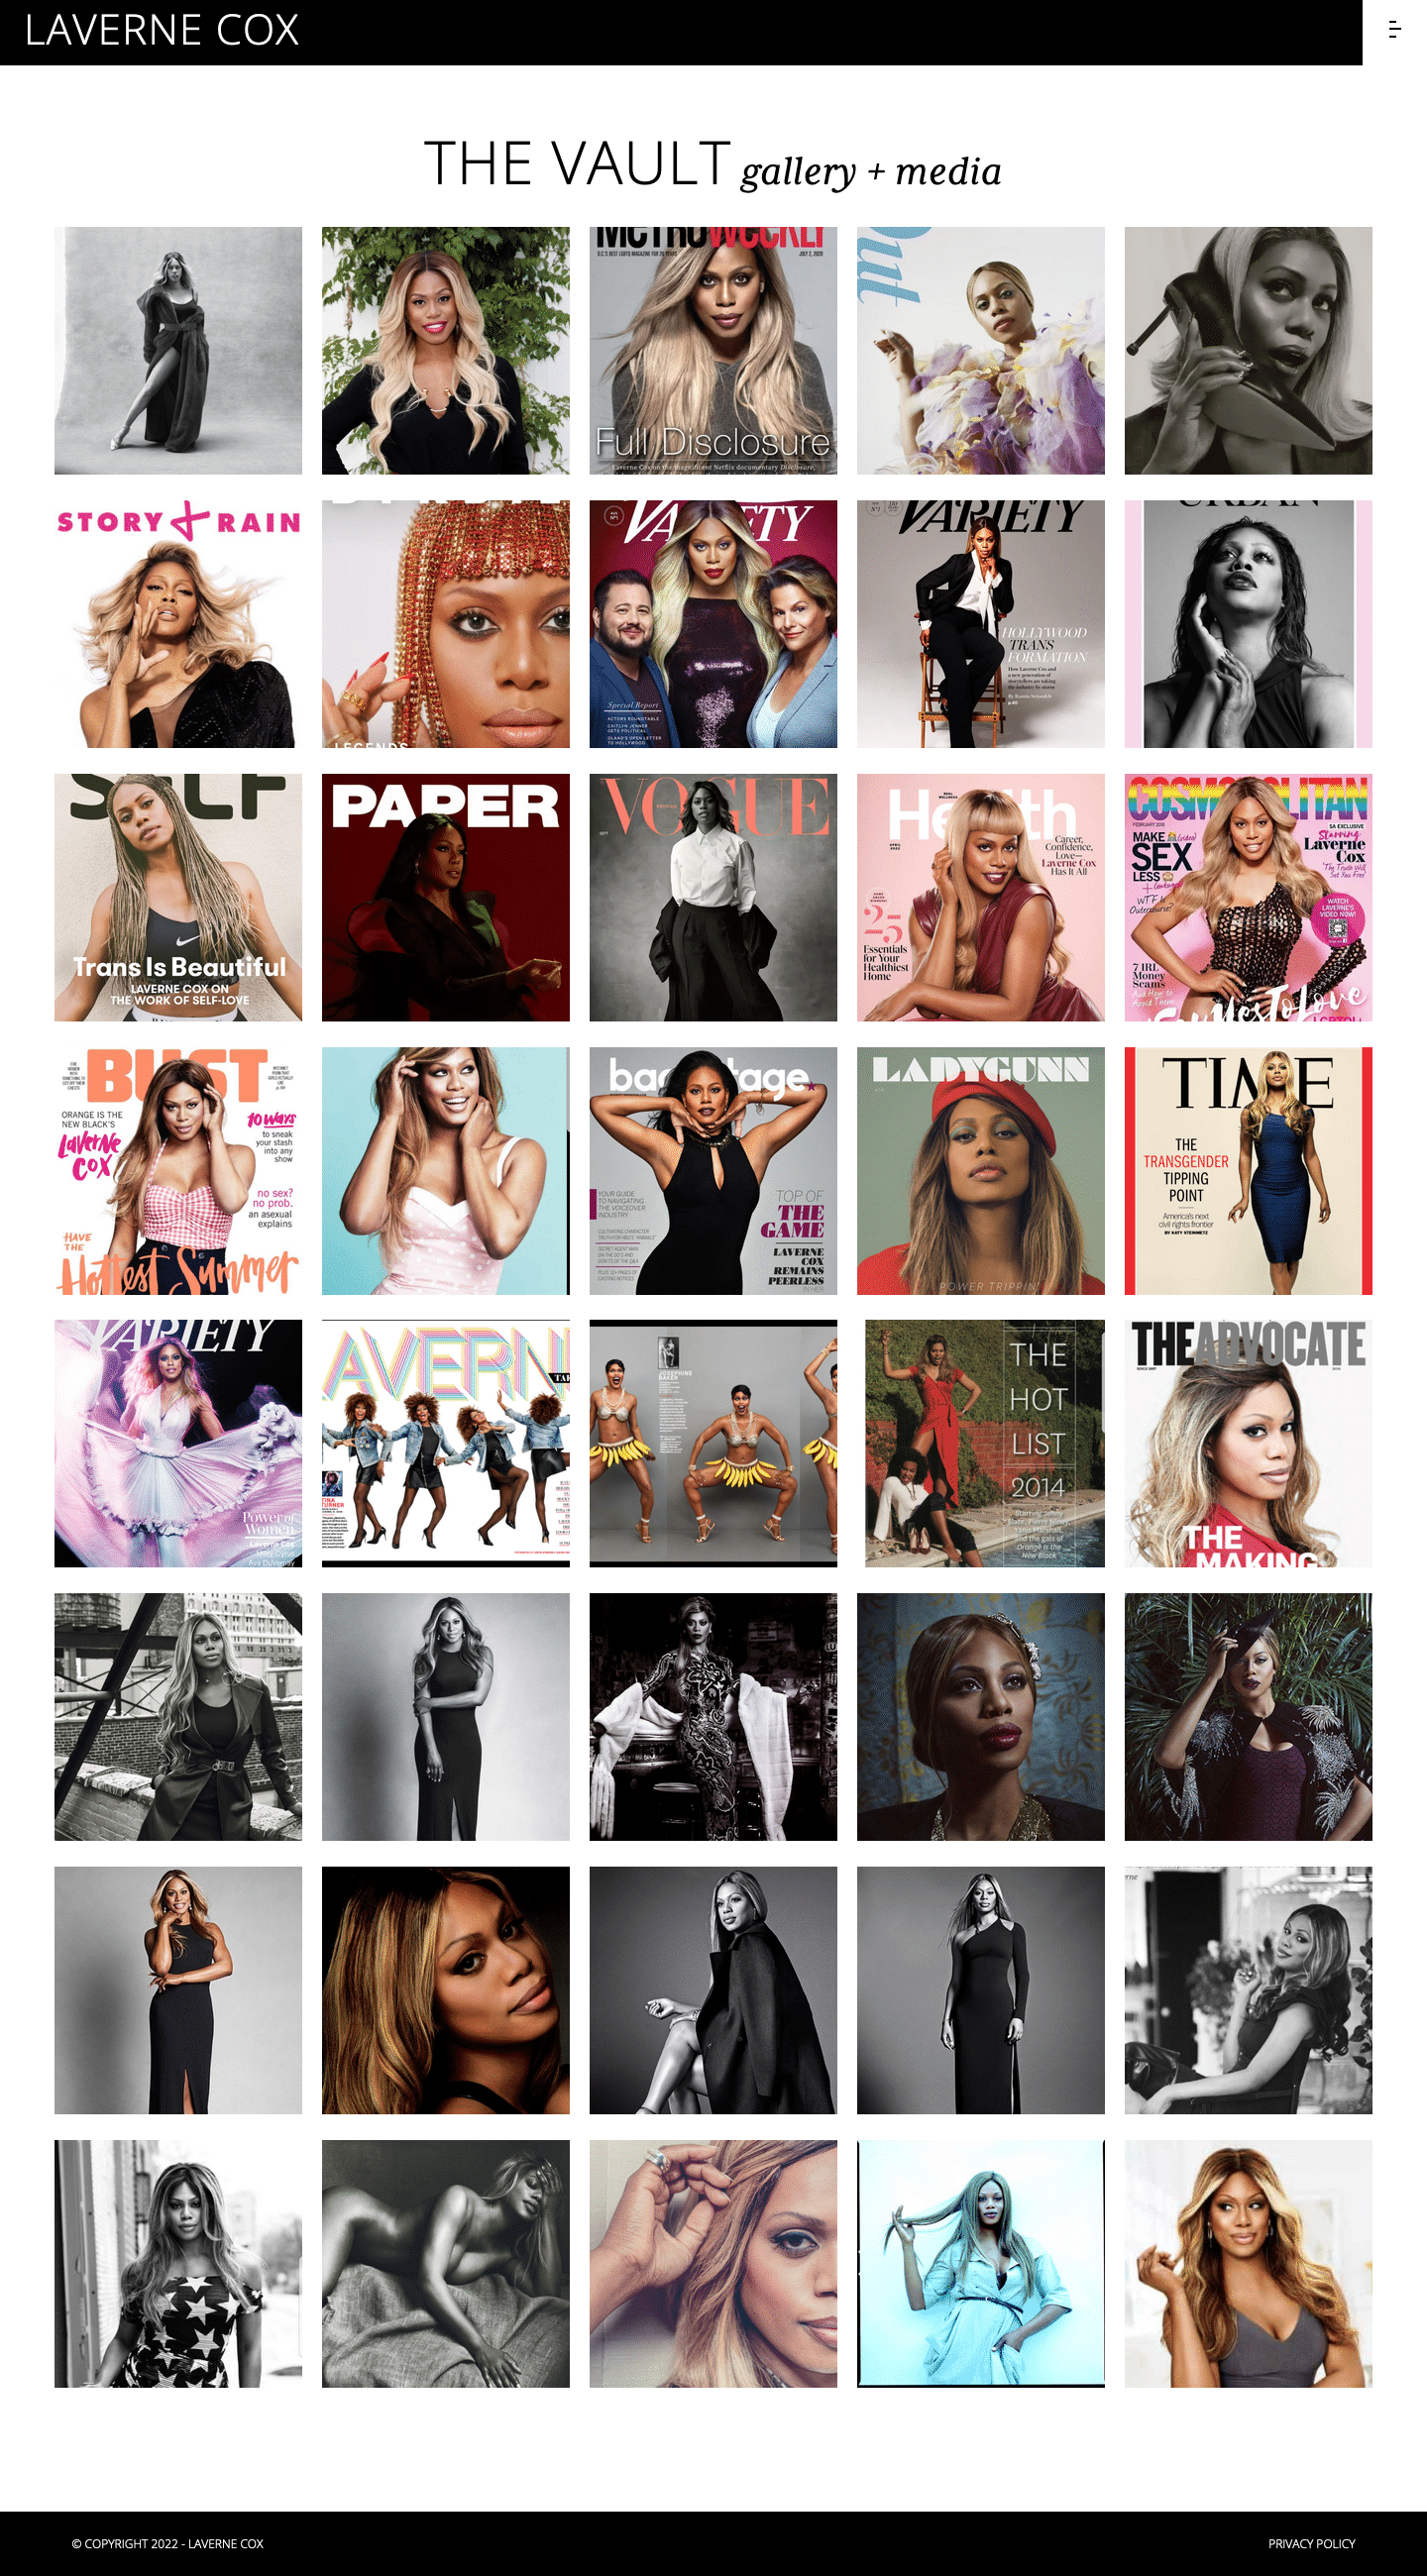 Laverne Cox The Vault gallery + media page.